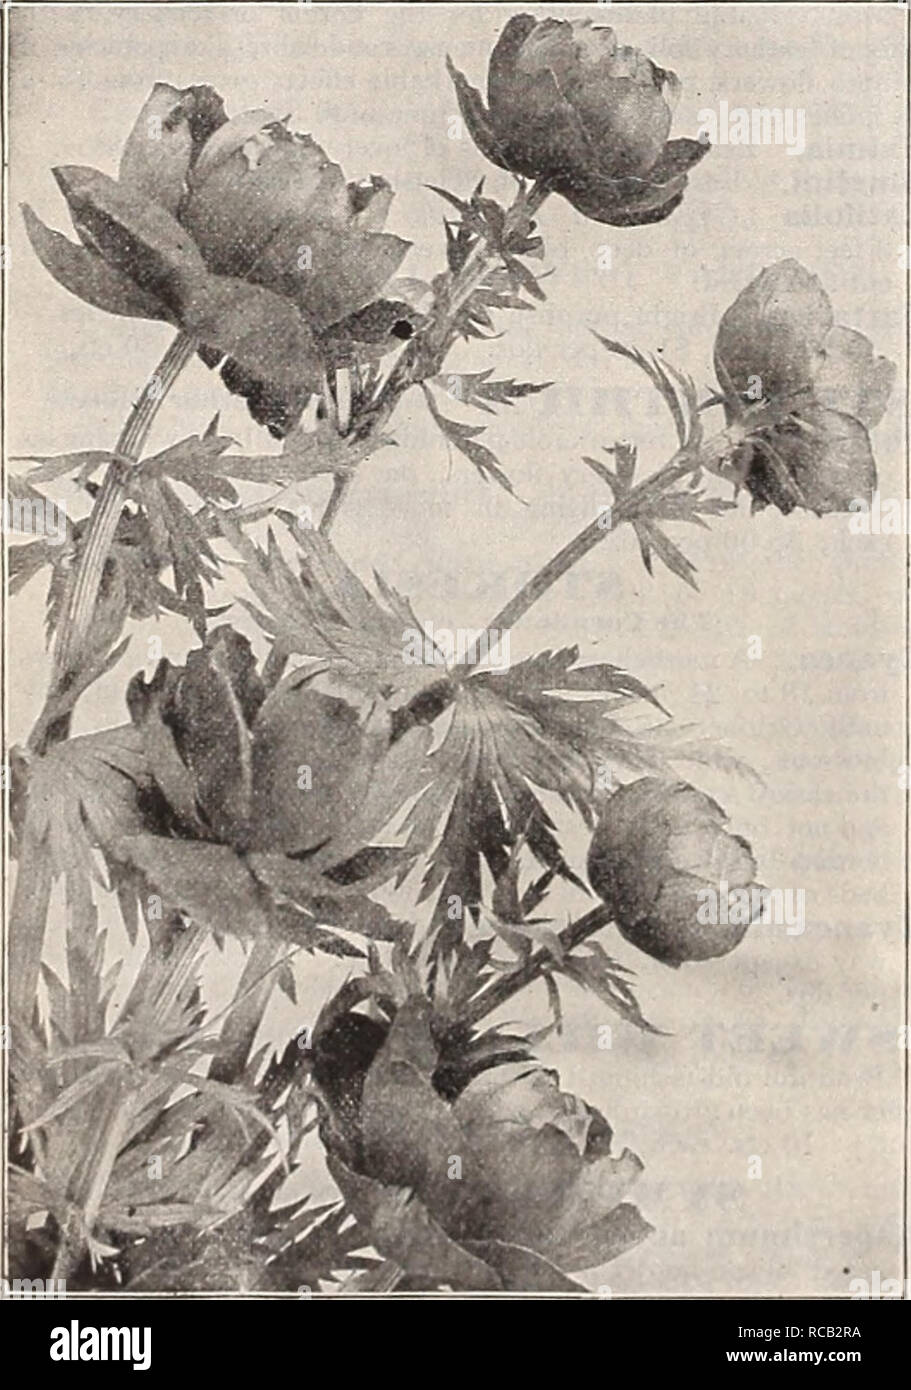 . Dreer's 1909 garden book. Seeds Catalogs; Nursery stock Catalogs; Gardening Equipment and supplies Catalogs; Flowers Seeds Catalogs; Vegetables Seeds Catalogs; Fruit Seeds Catalogs. Thalictrvm.. Trollius (Globe Flower). THYMIS (Thj-meV Lanuginosus( Woolly-leaved Thyme . v soiling variety, with greyish foliage. Serpyllum ( White Mountain Thyme). A pretli - I for the rockery, forming dense mats of dark green foliage and clouds of white flowers. — Coccinea [Scarlet Thyme). Dark green foliage and clouds of bright red flowers. — Splendens Bright purplish red flowers. 15 cts. each; $1.50 per doz.; Stock Photo